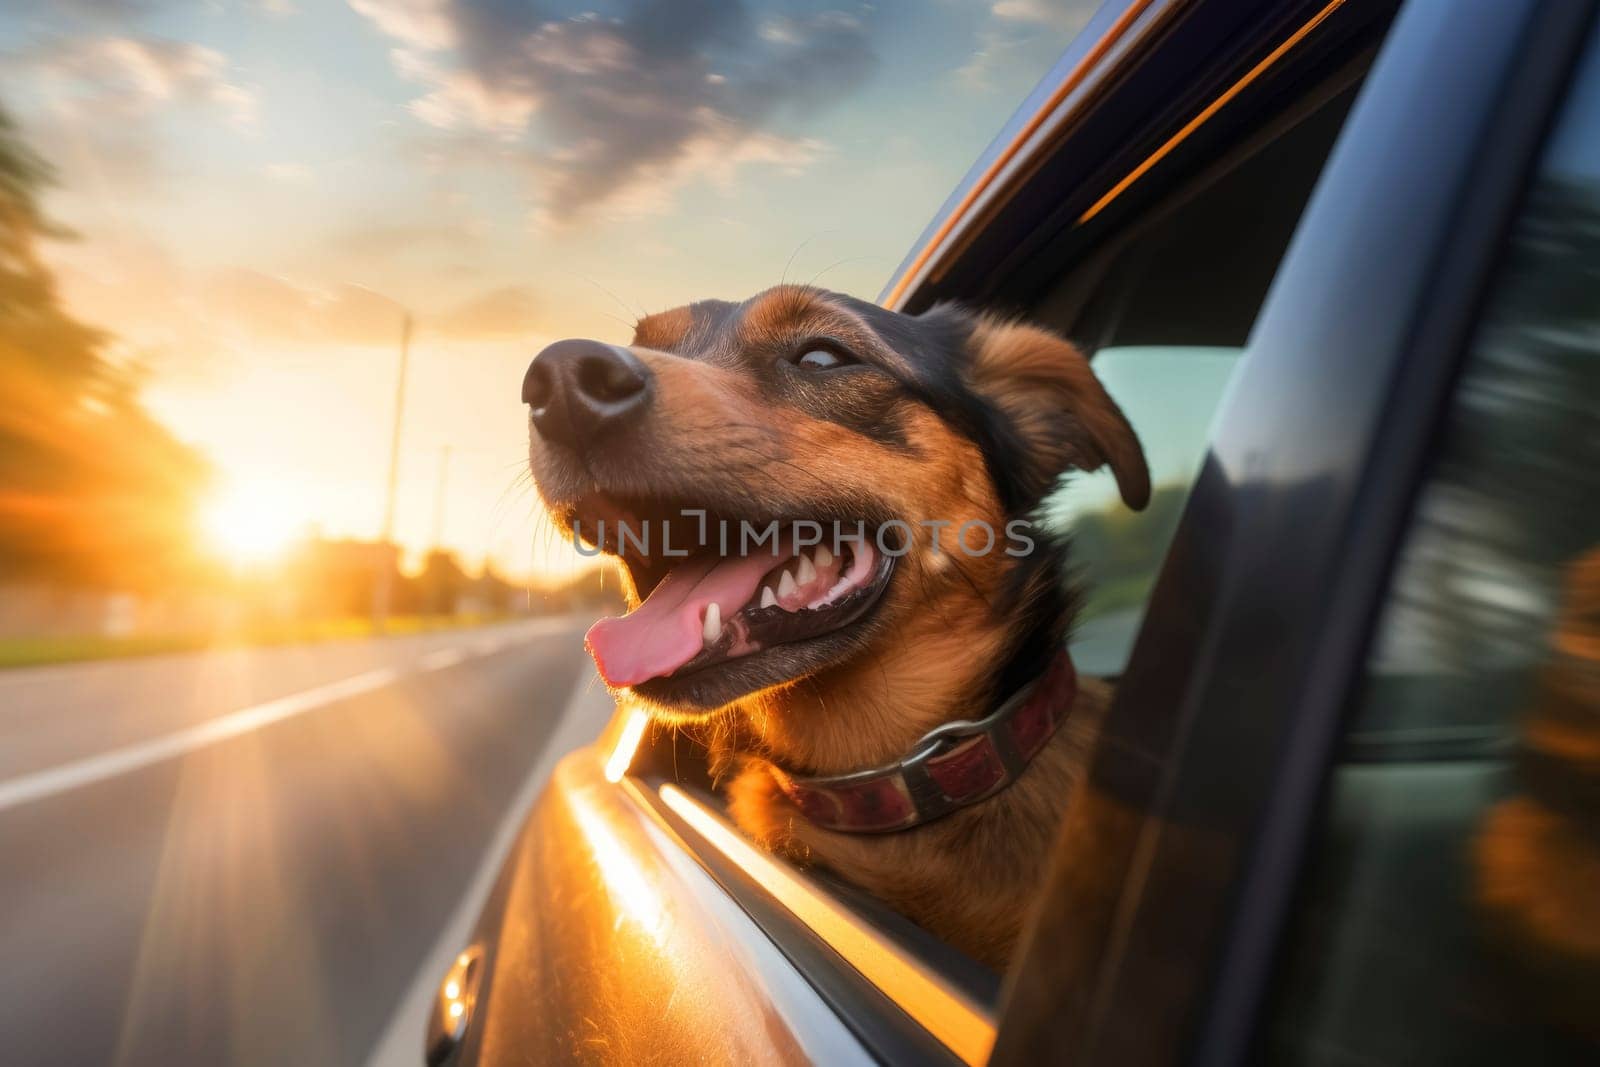 Dog enjoying car ride with head out of window during sunset. Pet travel and adventure concept. Joyful canine expression with copy space for design and prin